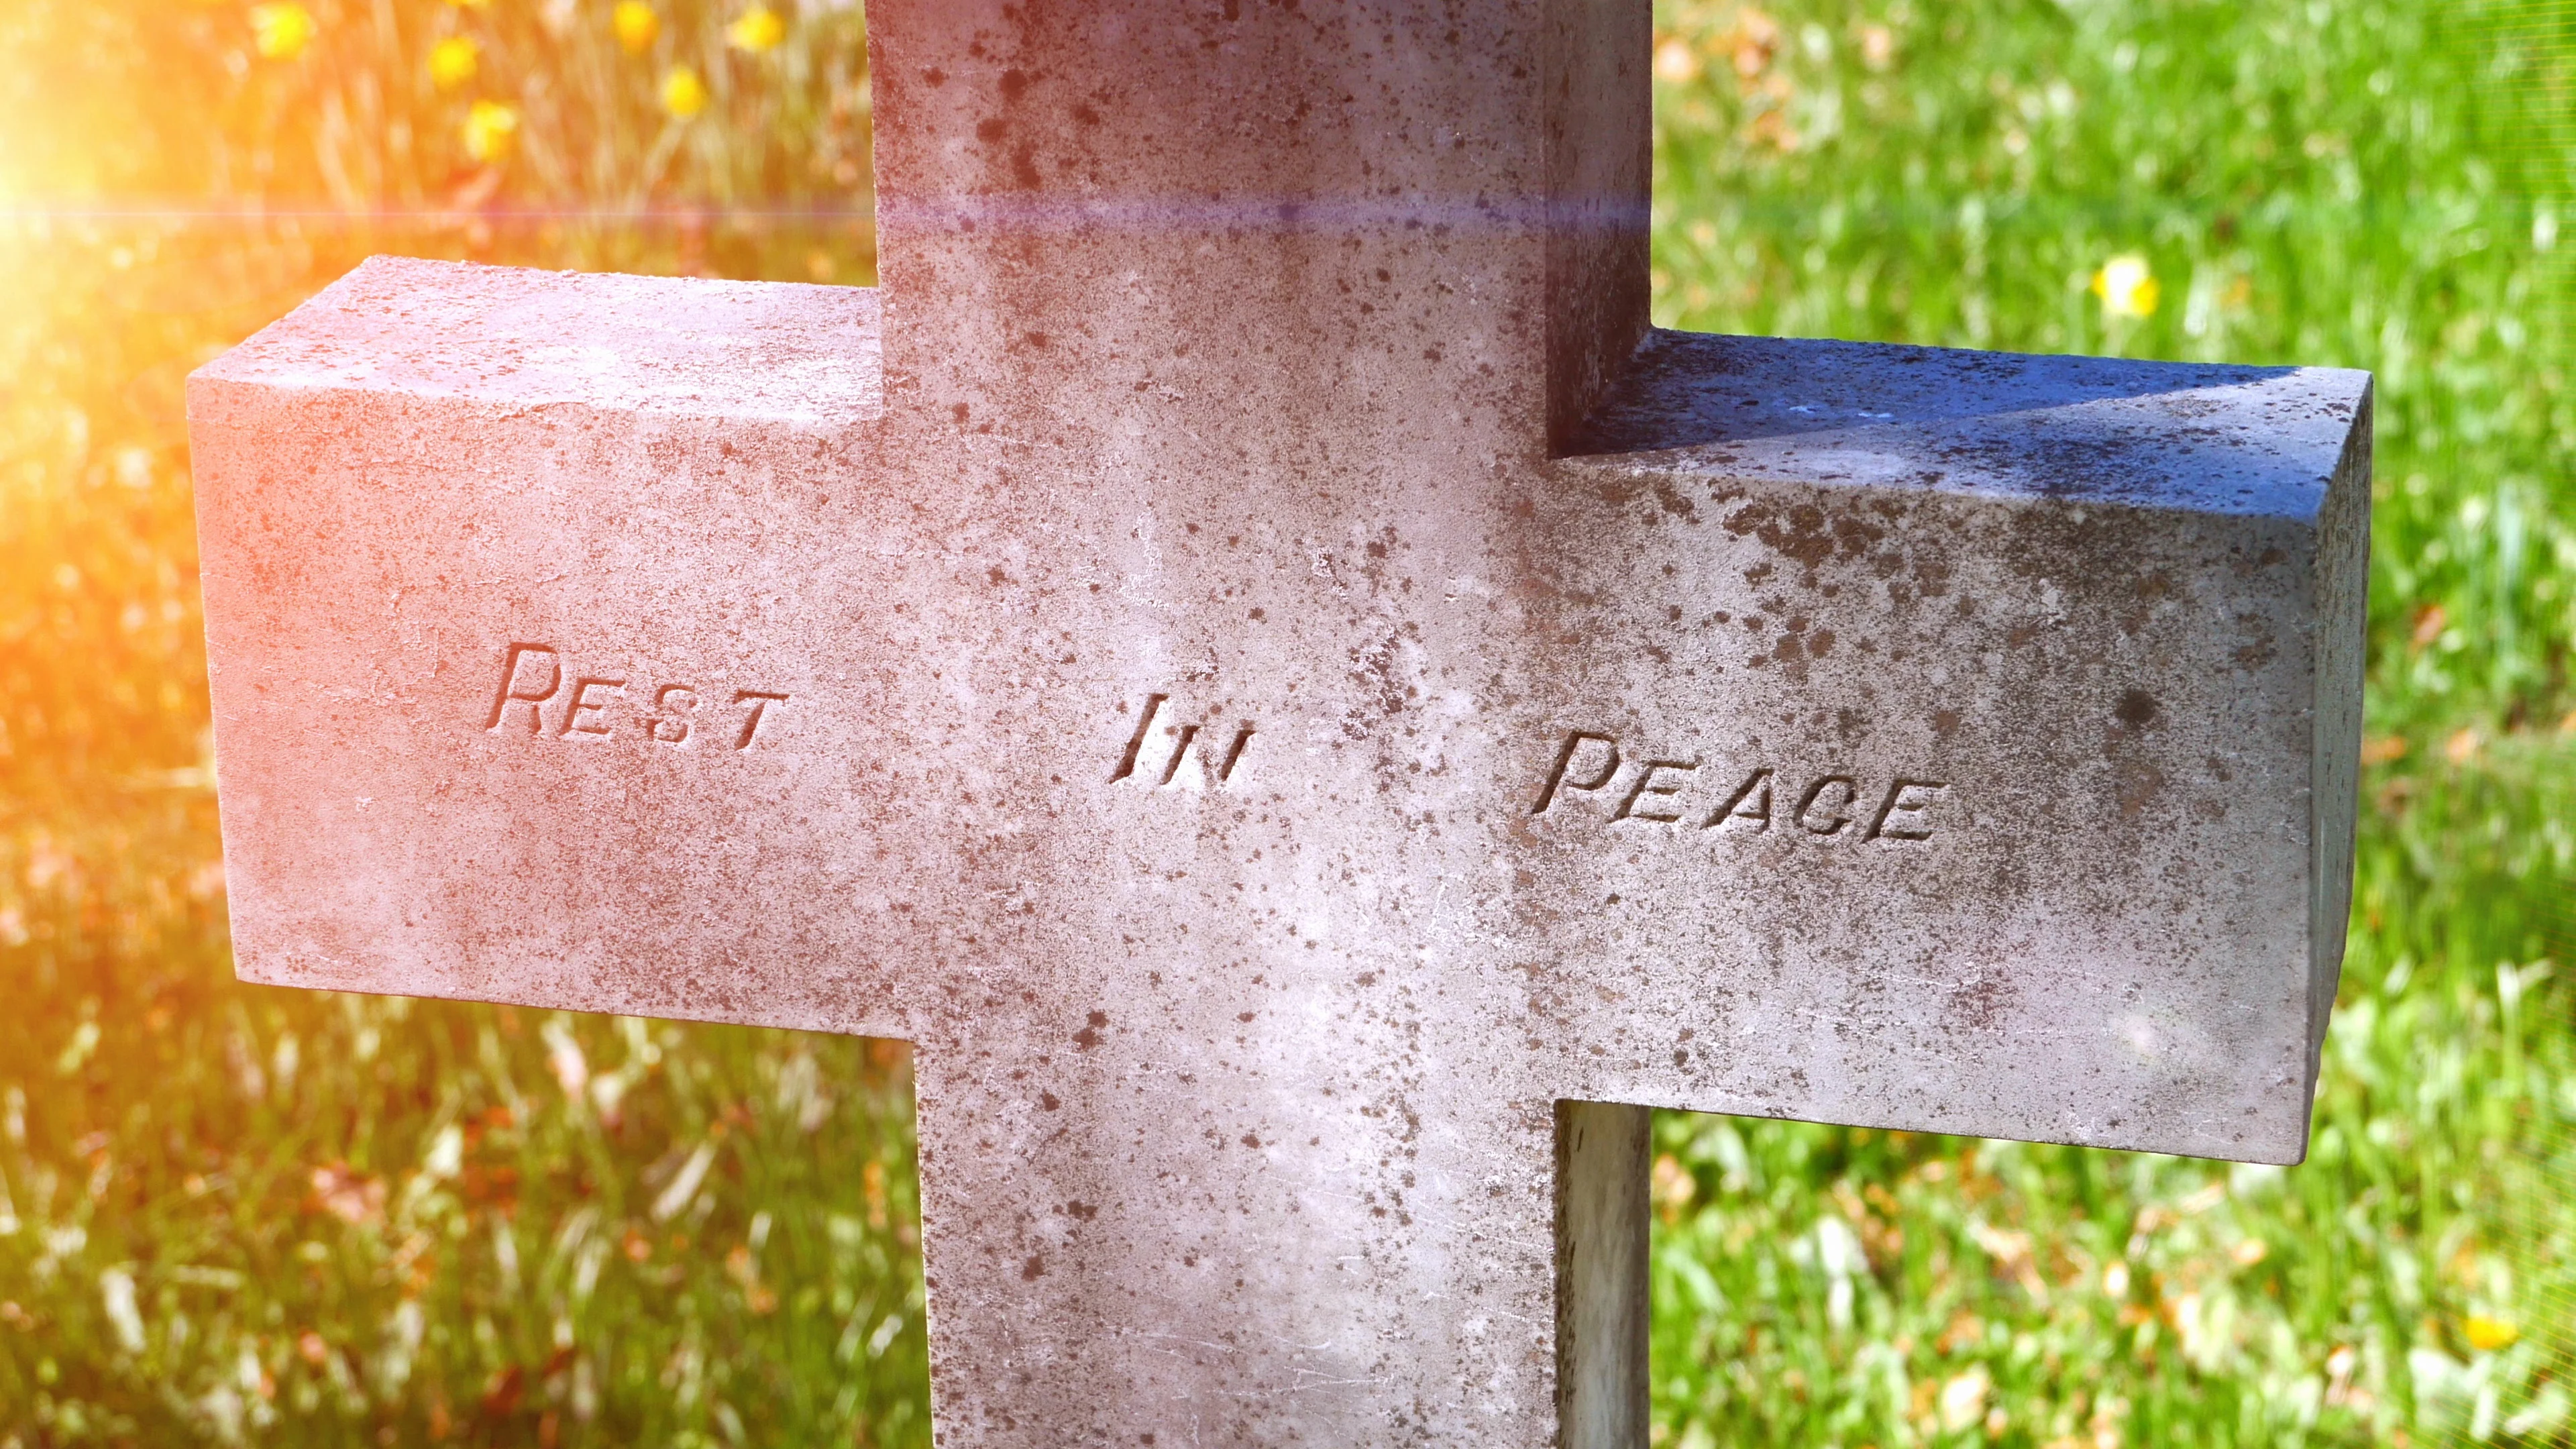 Free: Headstone Cemetery Grave Tomb Rest in peace, cemetery